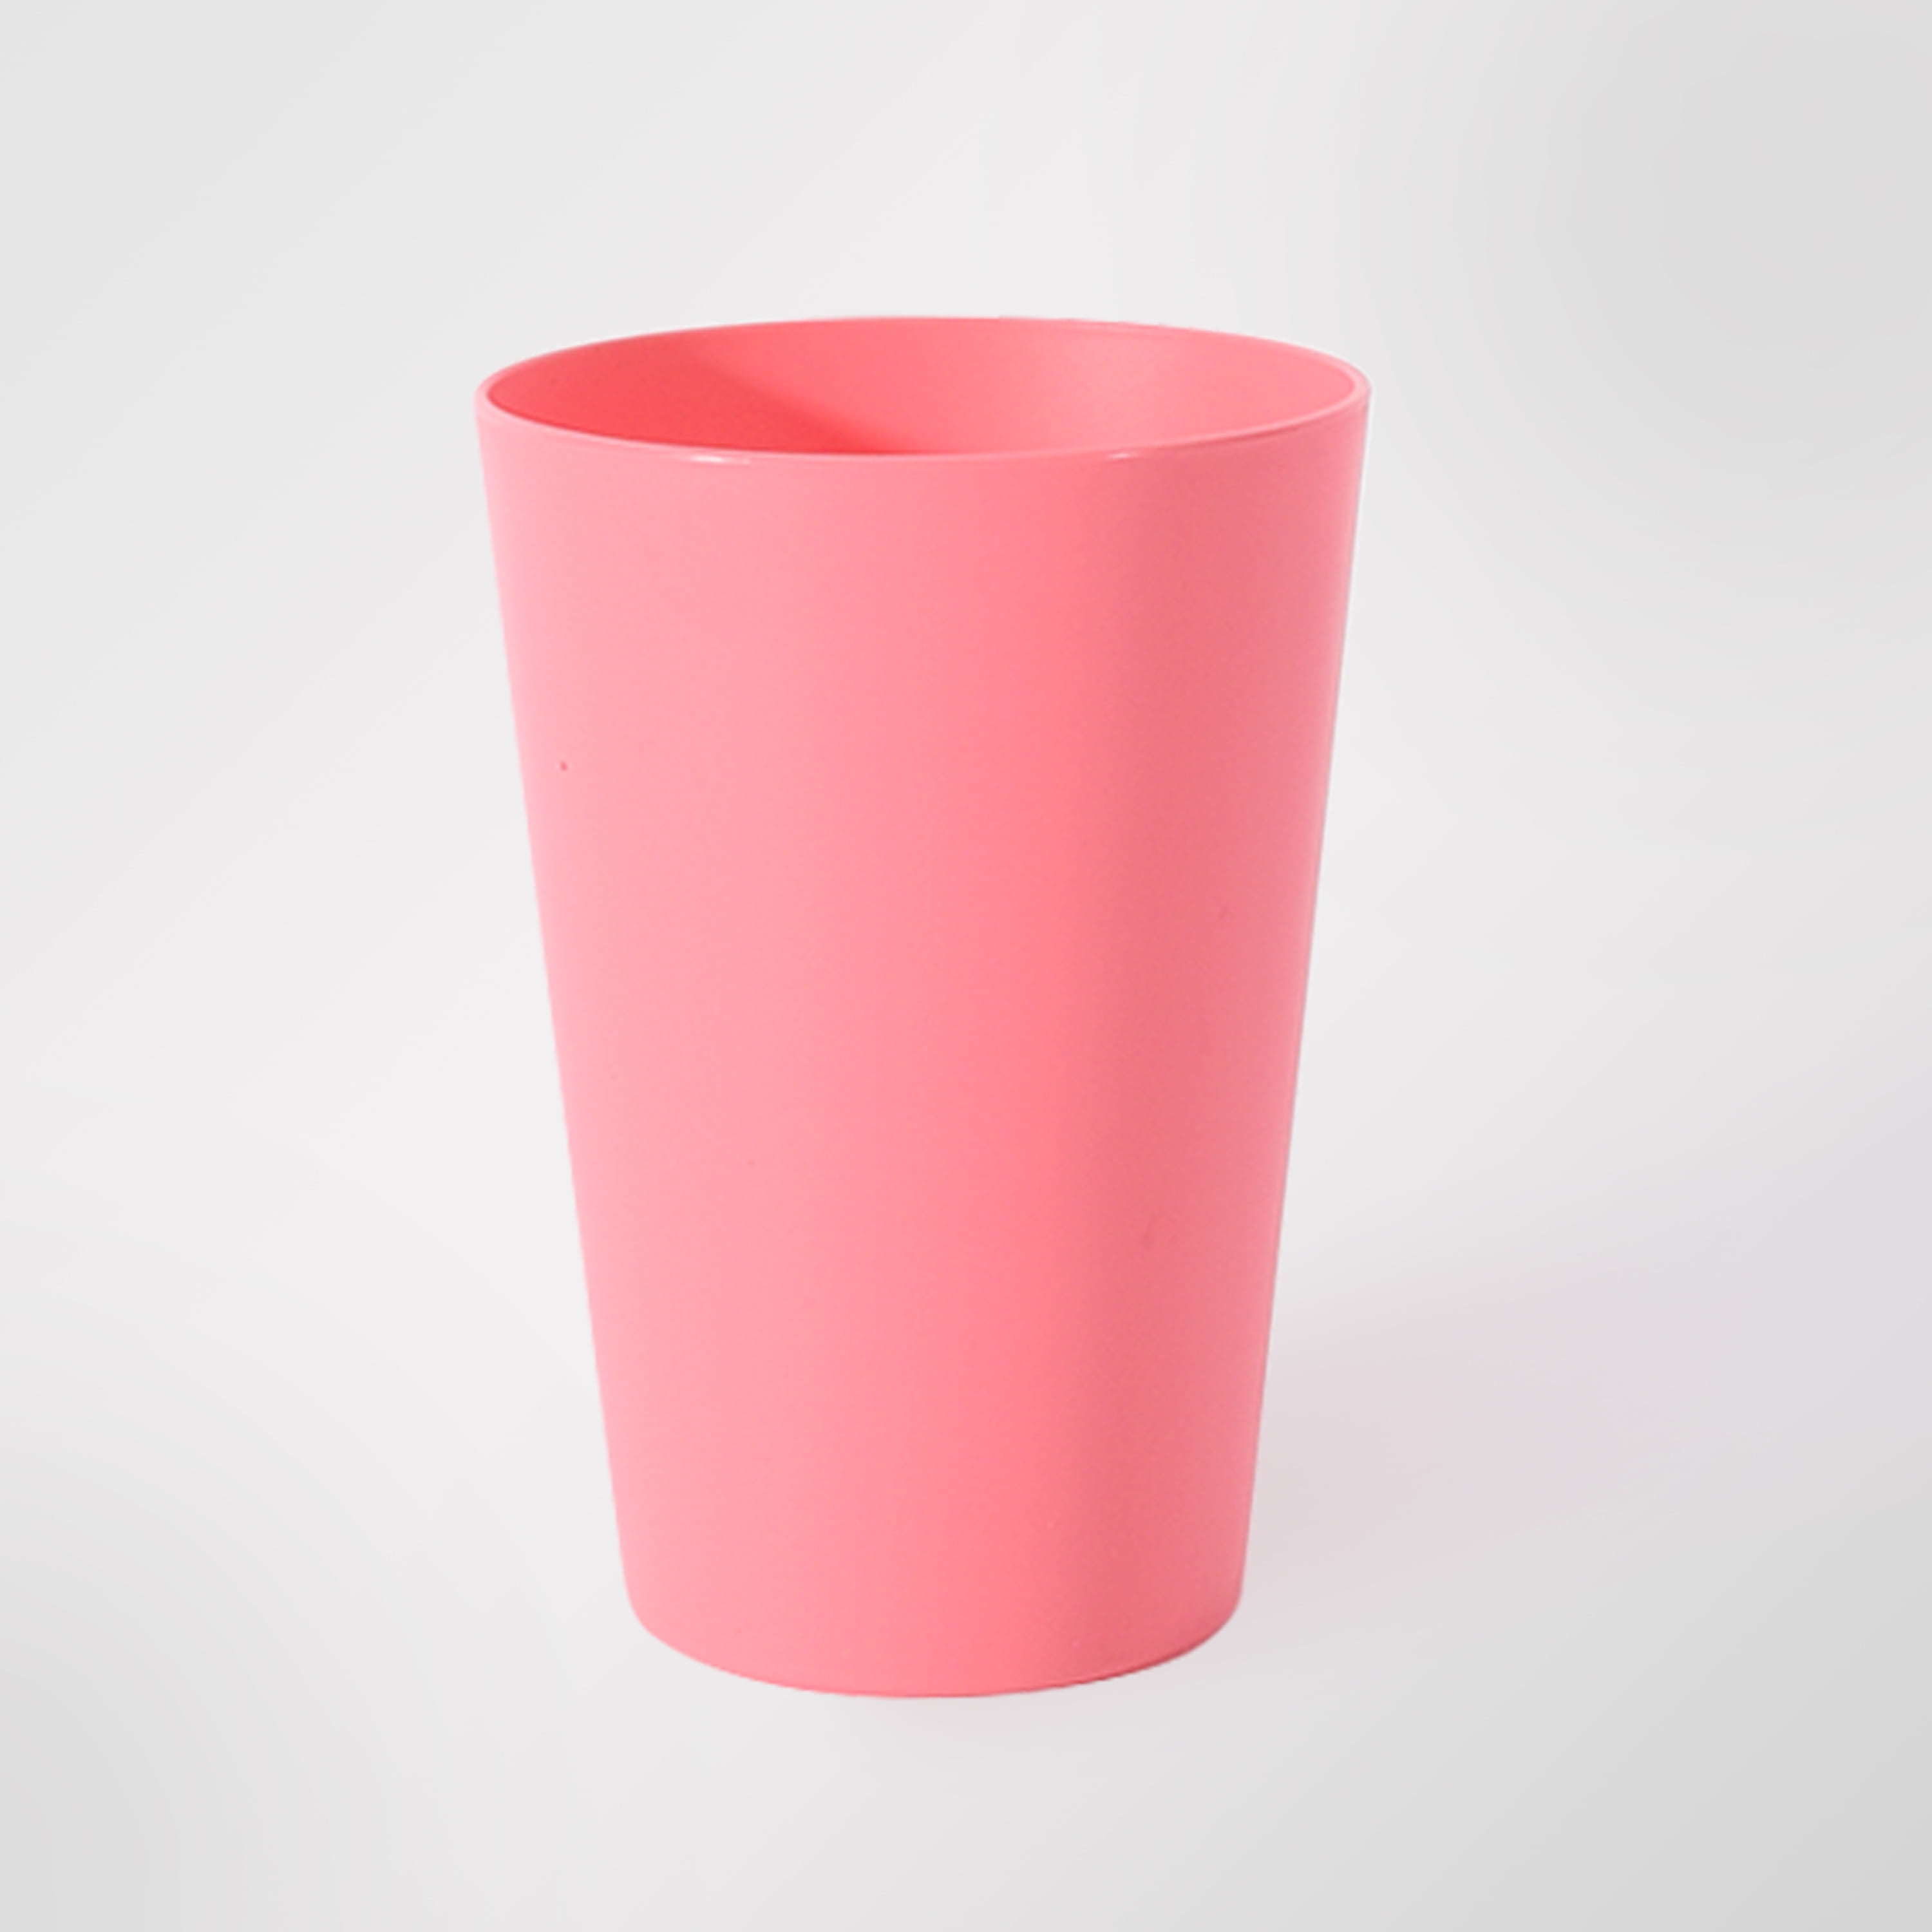 Your Zone Pink 15-Ounce Plastic Cup, Single Piece Tumbler